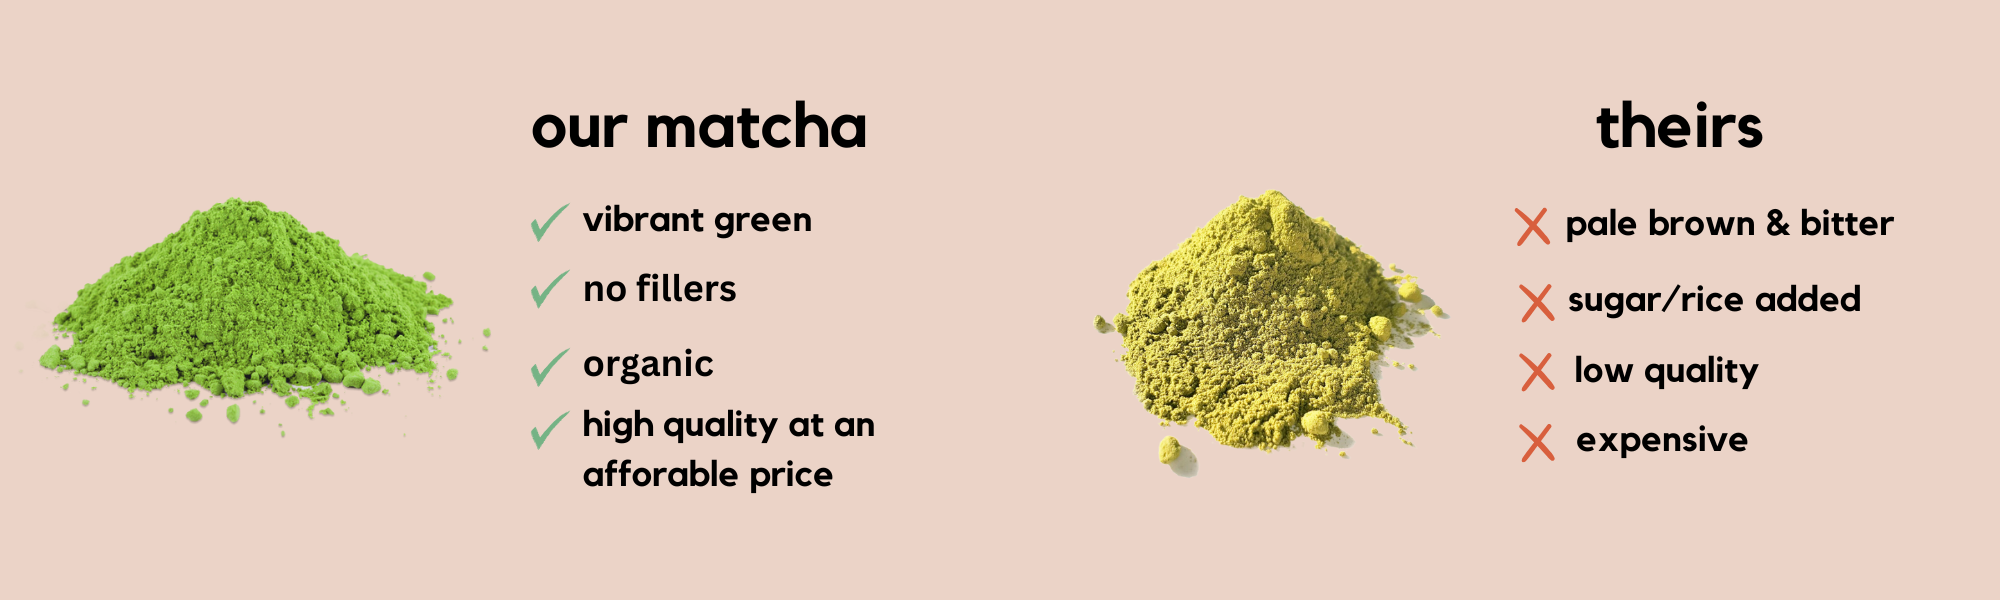 A pink background image with two matcha piles showing the how greenboxed matcha looks VS other matcha. Greenboxed matcha has a vibrant green color, in other hand, other matcha brands have a dull brown color. The image represents the difference between Greenboxed matcha and other brands. Greenboxed matcha is vibrant green, no fillers, organic, and high quality at an afforable price.  Other brands are pale brown and bitter,  have added sugar or rice, are low quality and expensive. 